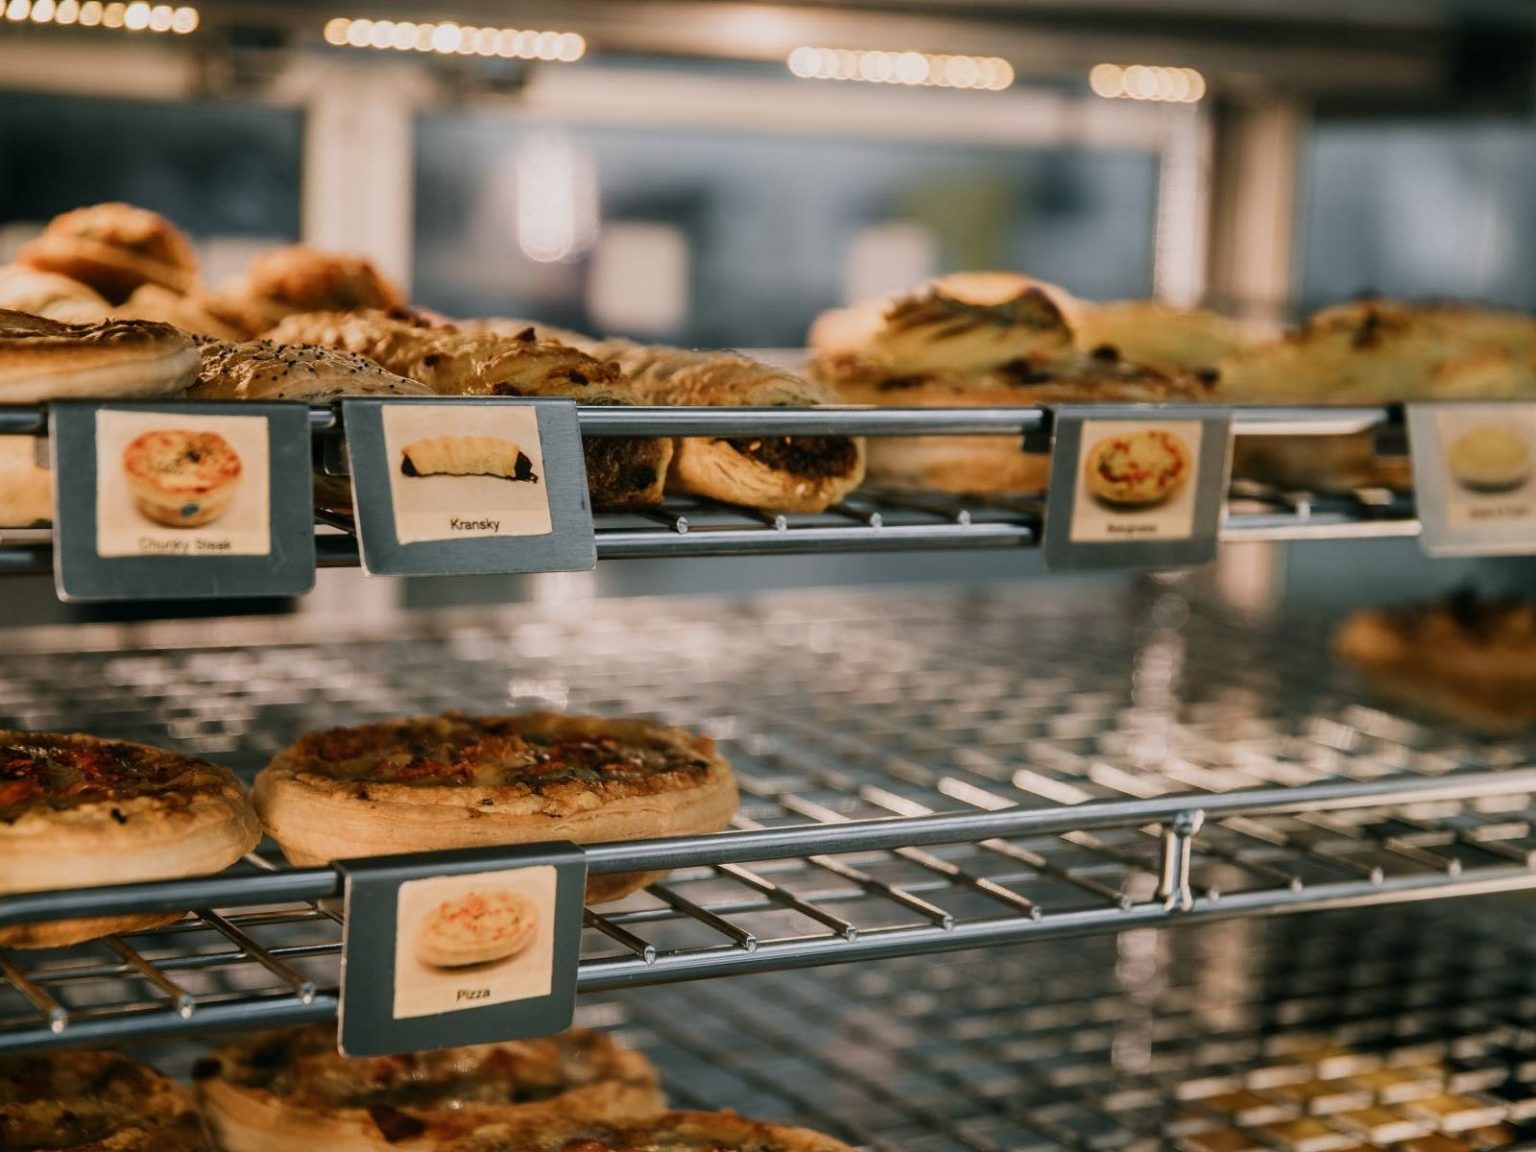 Selection of pies and pastries